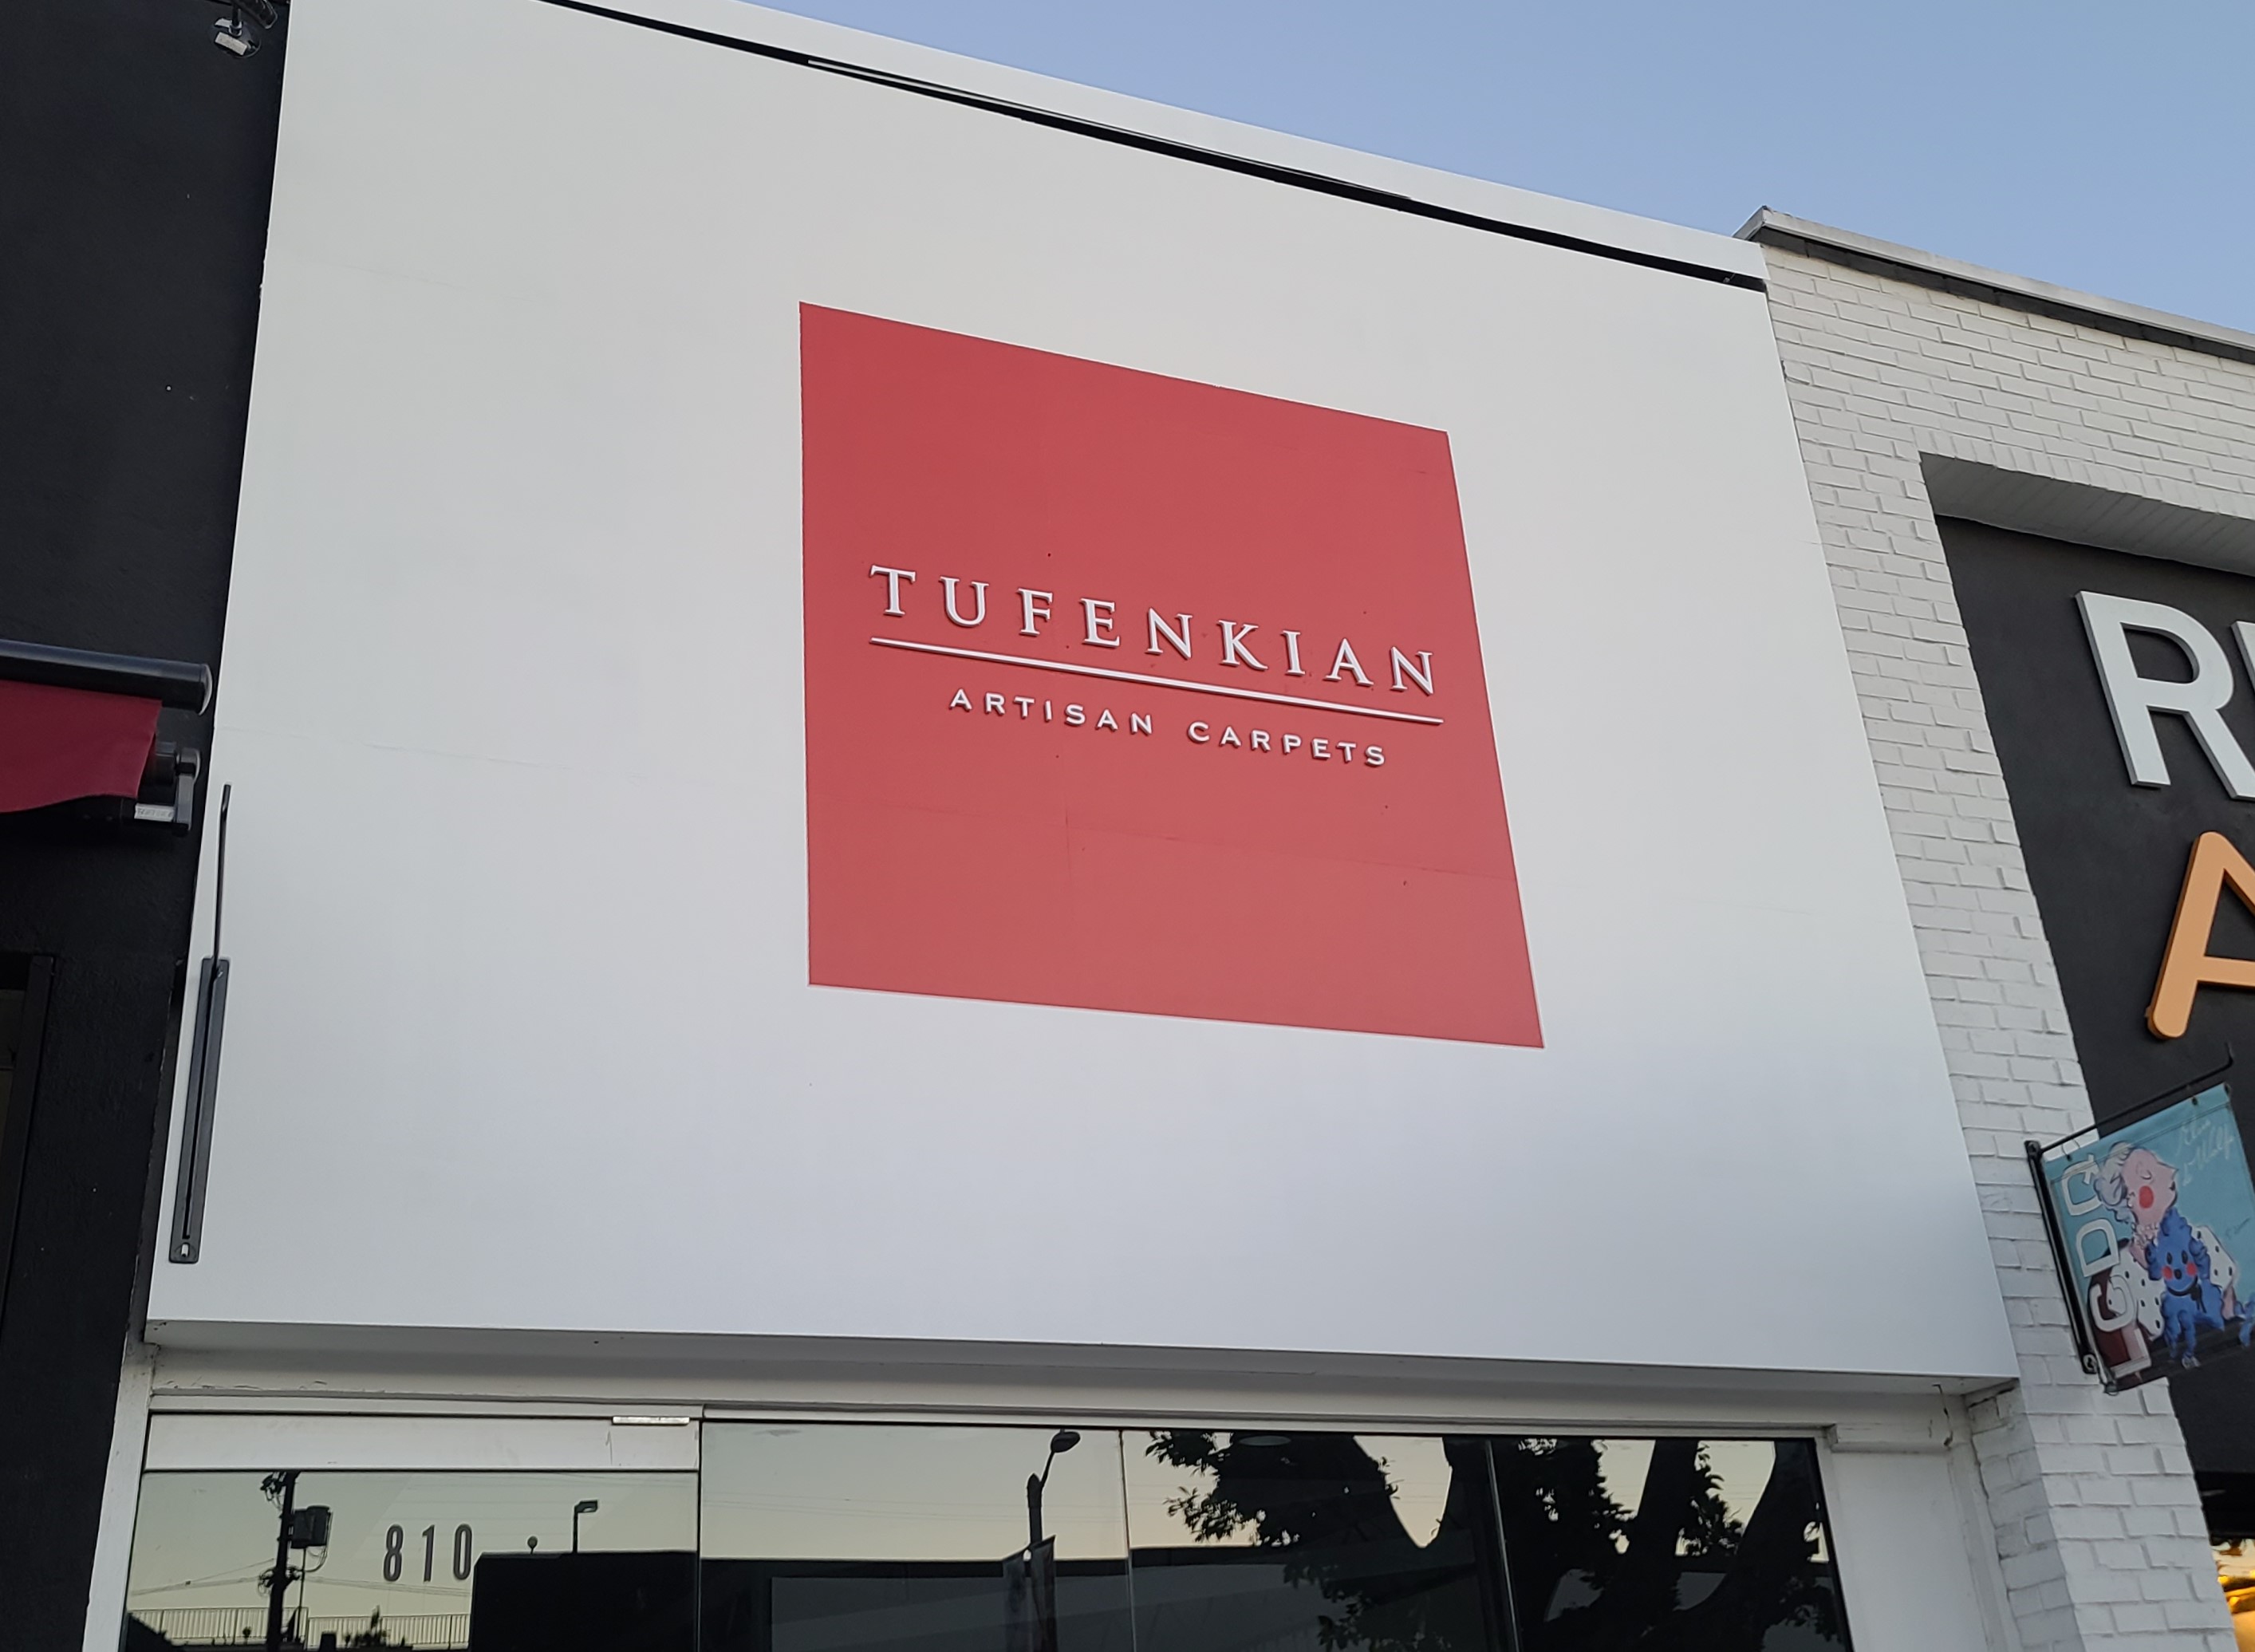 For Tufenkian Artisan Carpets we painted their exterior wall white, painted a red square and then installed laser cut white acrylic letters.